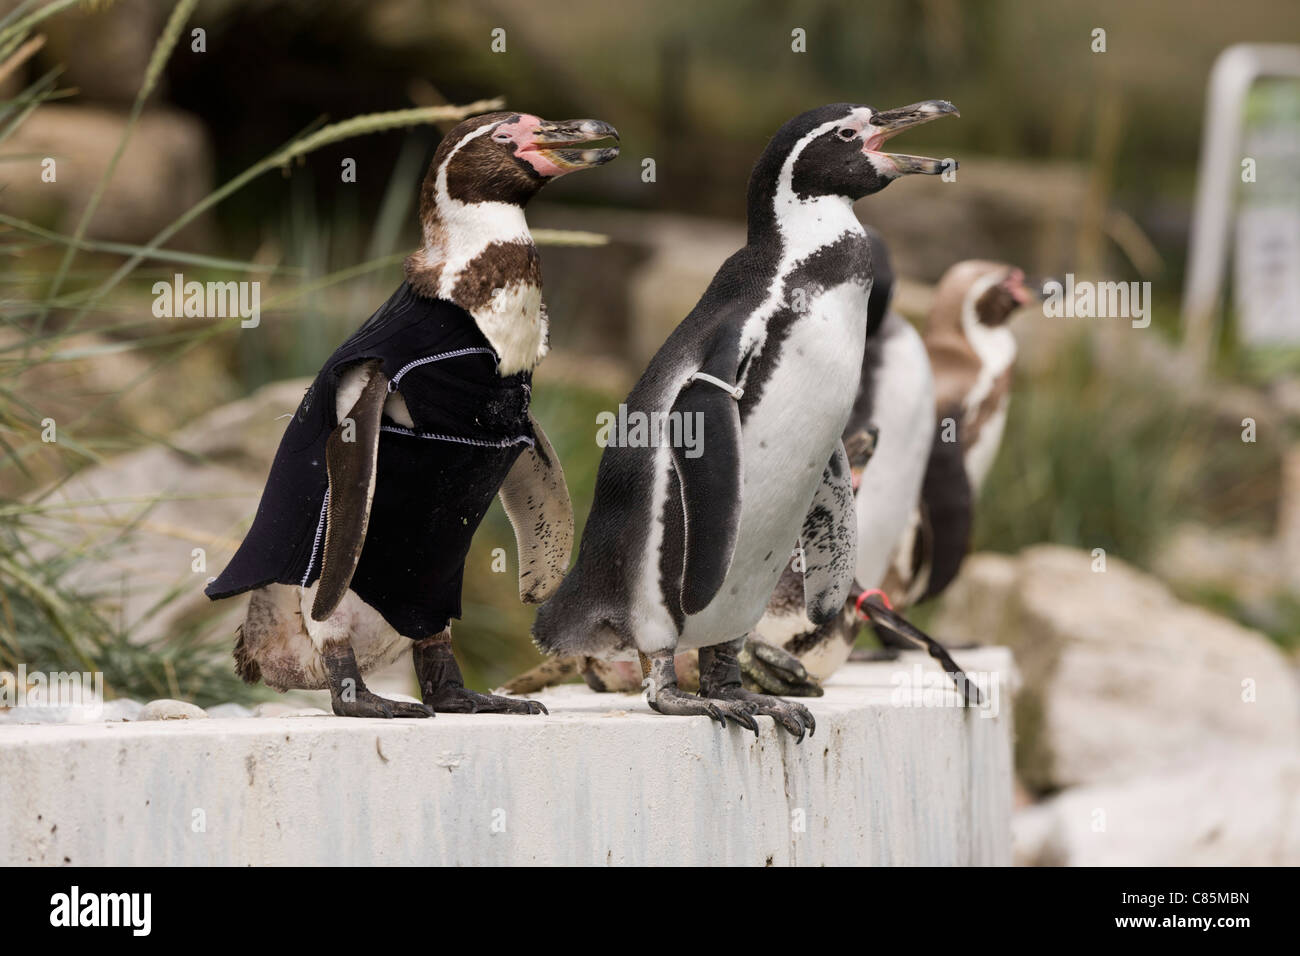 Penguins one in a makeshift wetsuit Stock Photo